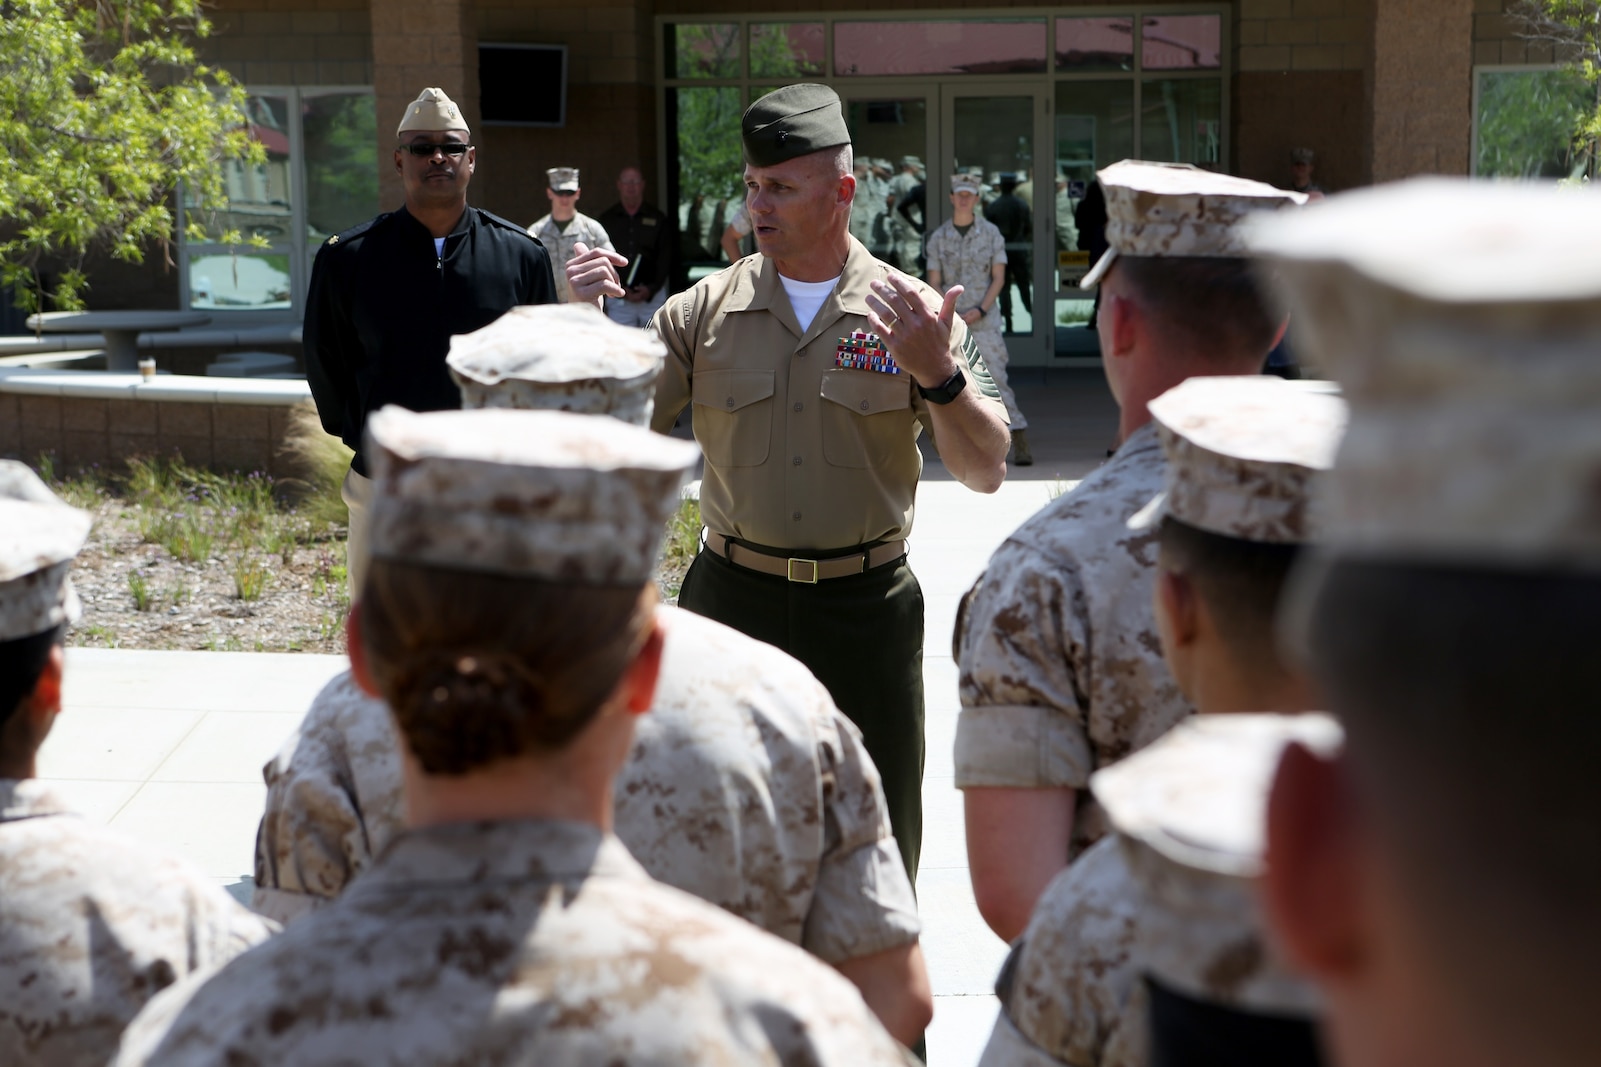 U.S. Marine Sgt. Maj. Charles W. Weeks addresses non-commissioned officers from 7th Engineer Support Battalion at the opening of a new NCO lounge, known as Chapultepec’s, in their barracks building aboard Camp Pendleton, Calif., April 15, 2016. Weeks is the sergeant major of 7th ESB. The newly opened lounge is dedicated to give the NCOs a place in the barracks to come together and unwind, forming stronger camaraderie in their ranks. (U.S. Marine Corps photo by Cpl. Carson Gramley/released)